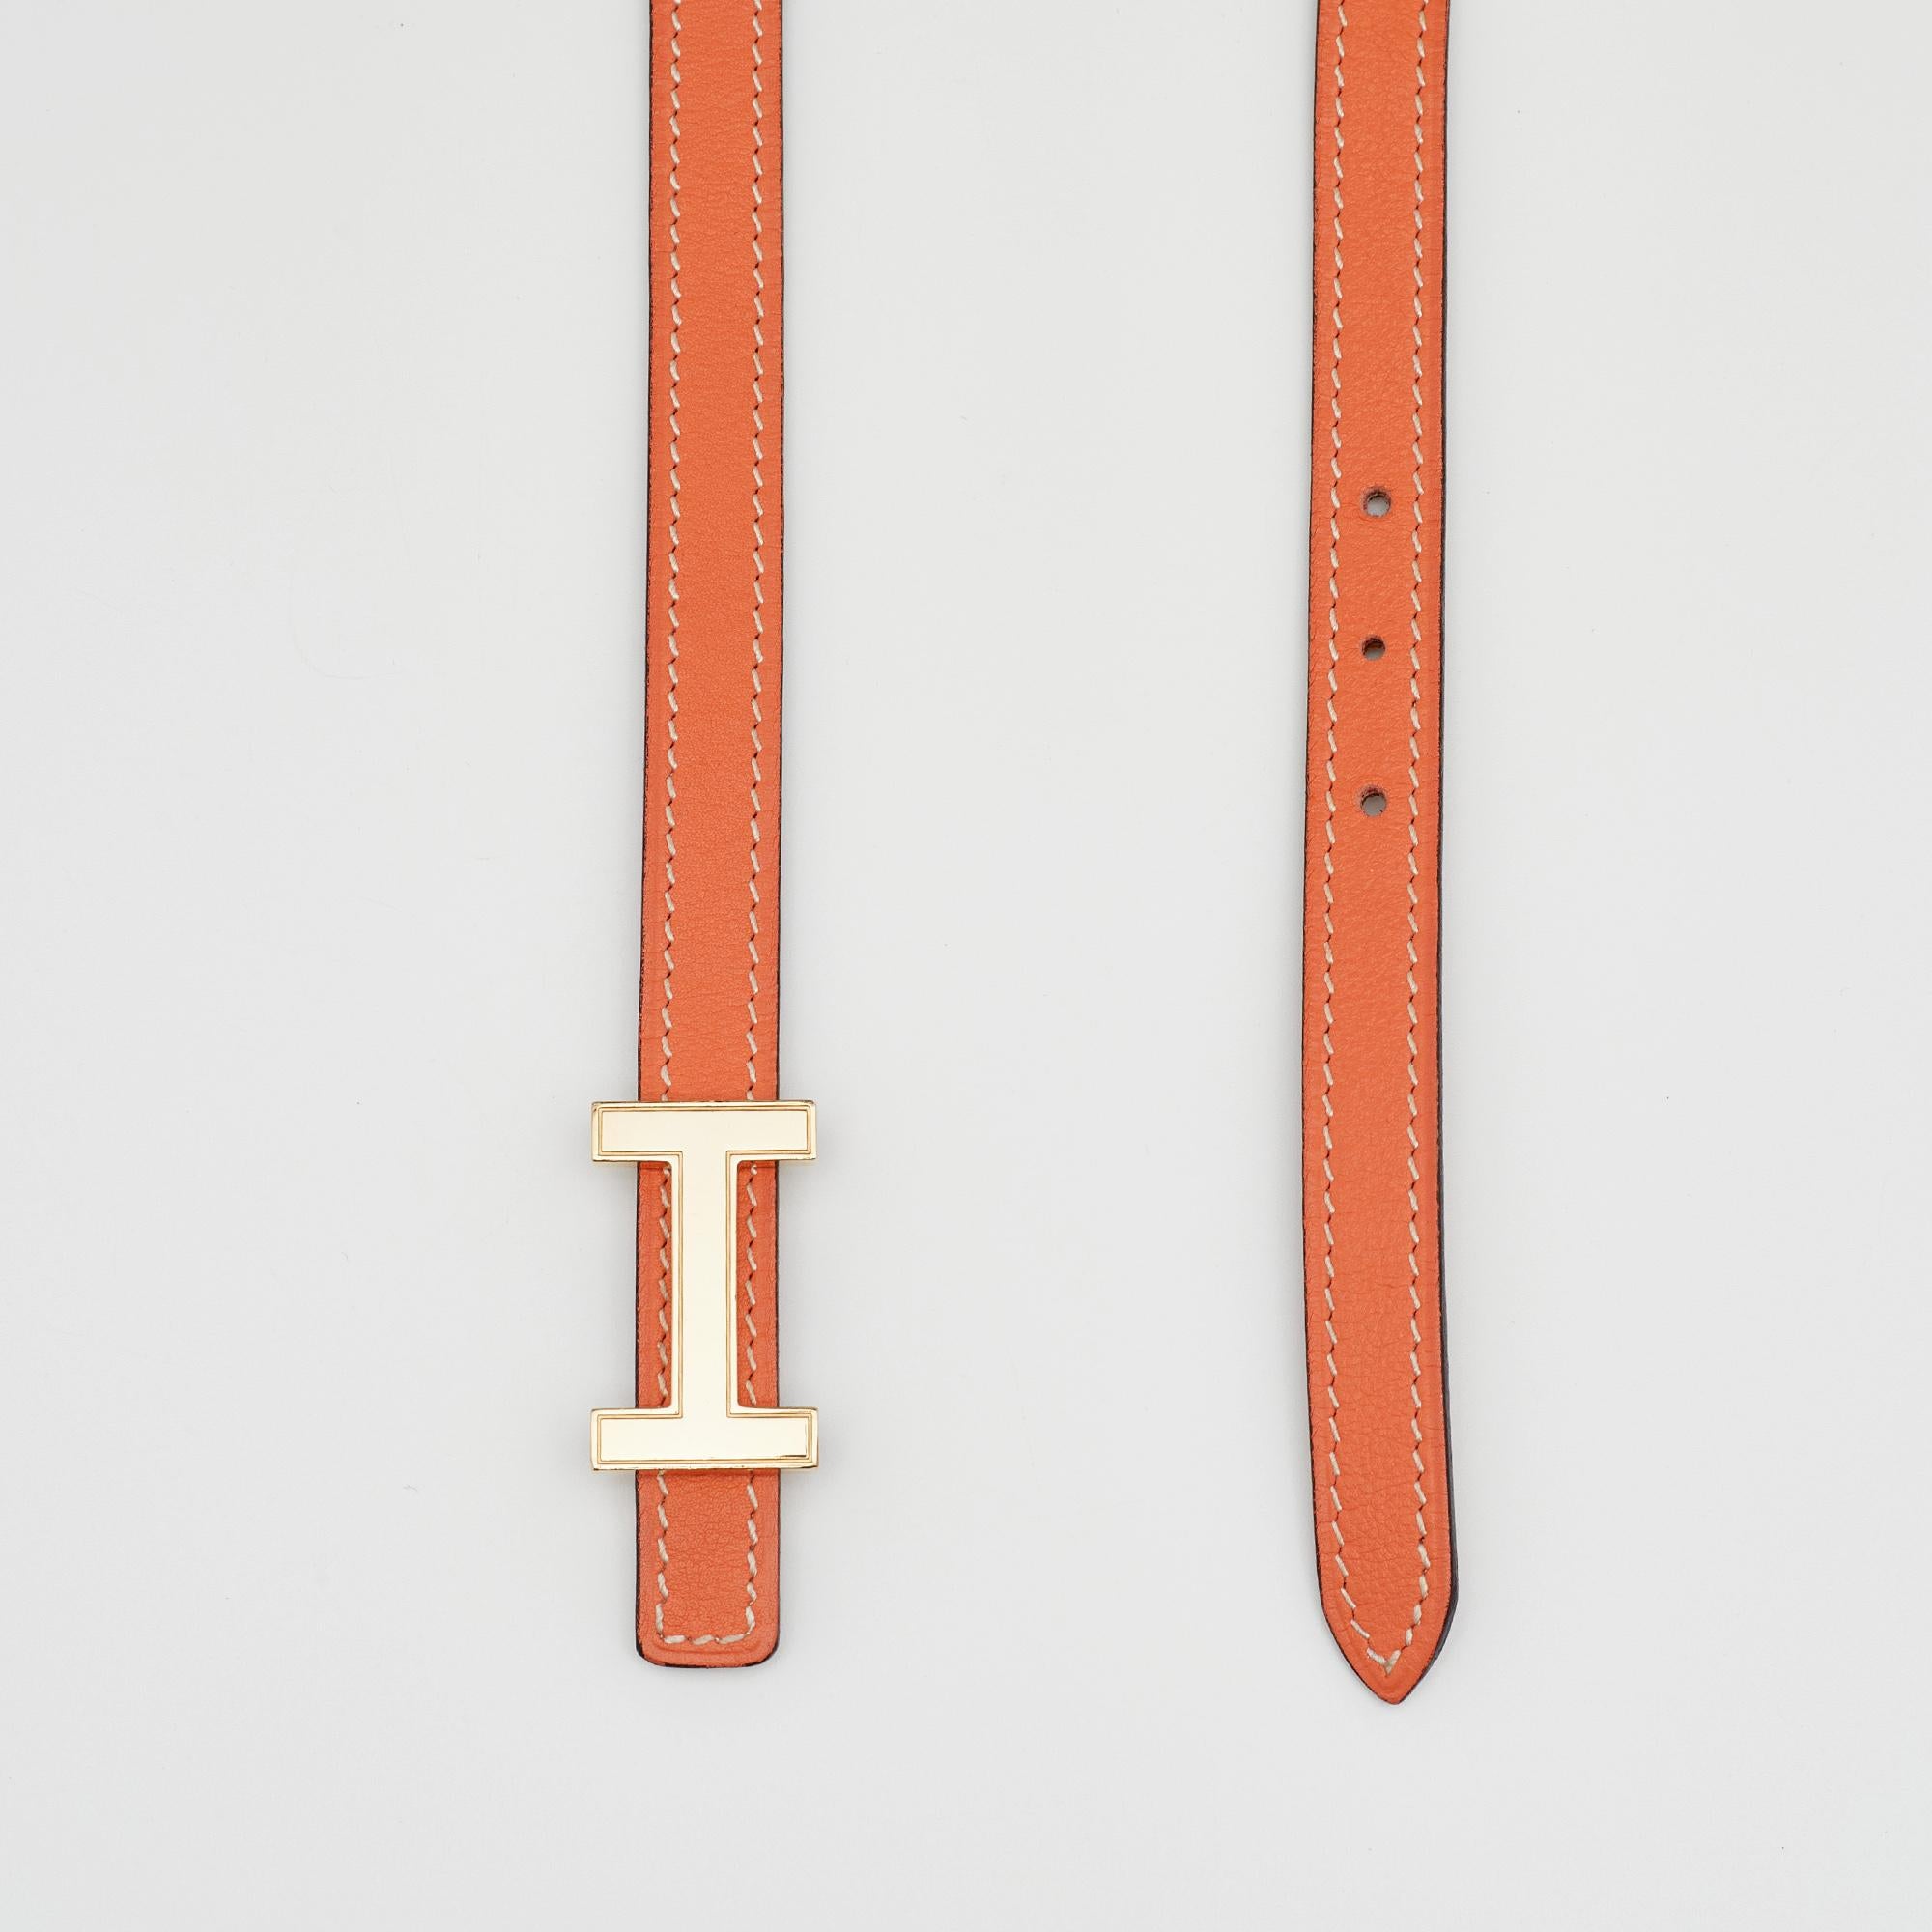 This Hermes buckle belt is a must-have for all the fans of the iconic and timeless brand. It is expertly designed from luxe leather and flaunts the 'H' logo lettering in gold tone on the front. This chic accessory can be styled with everything from